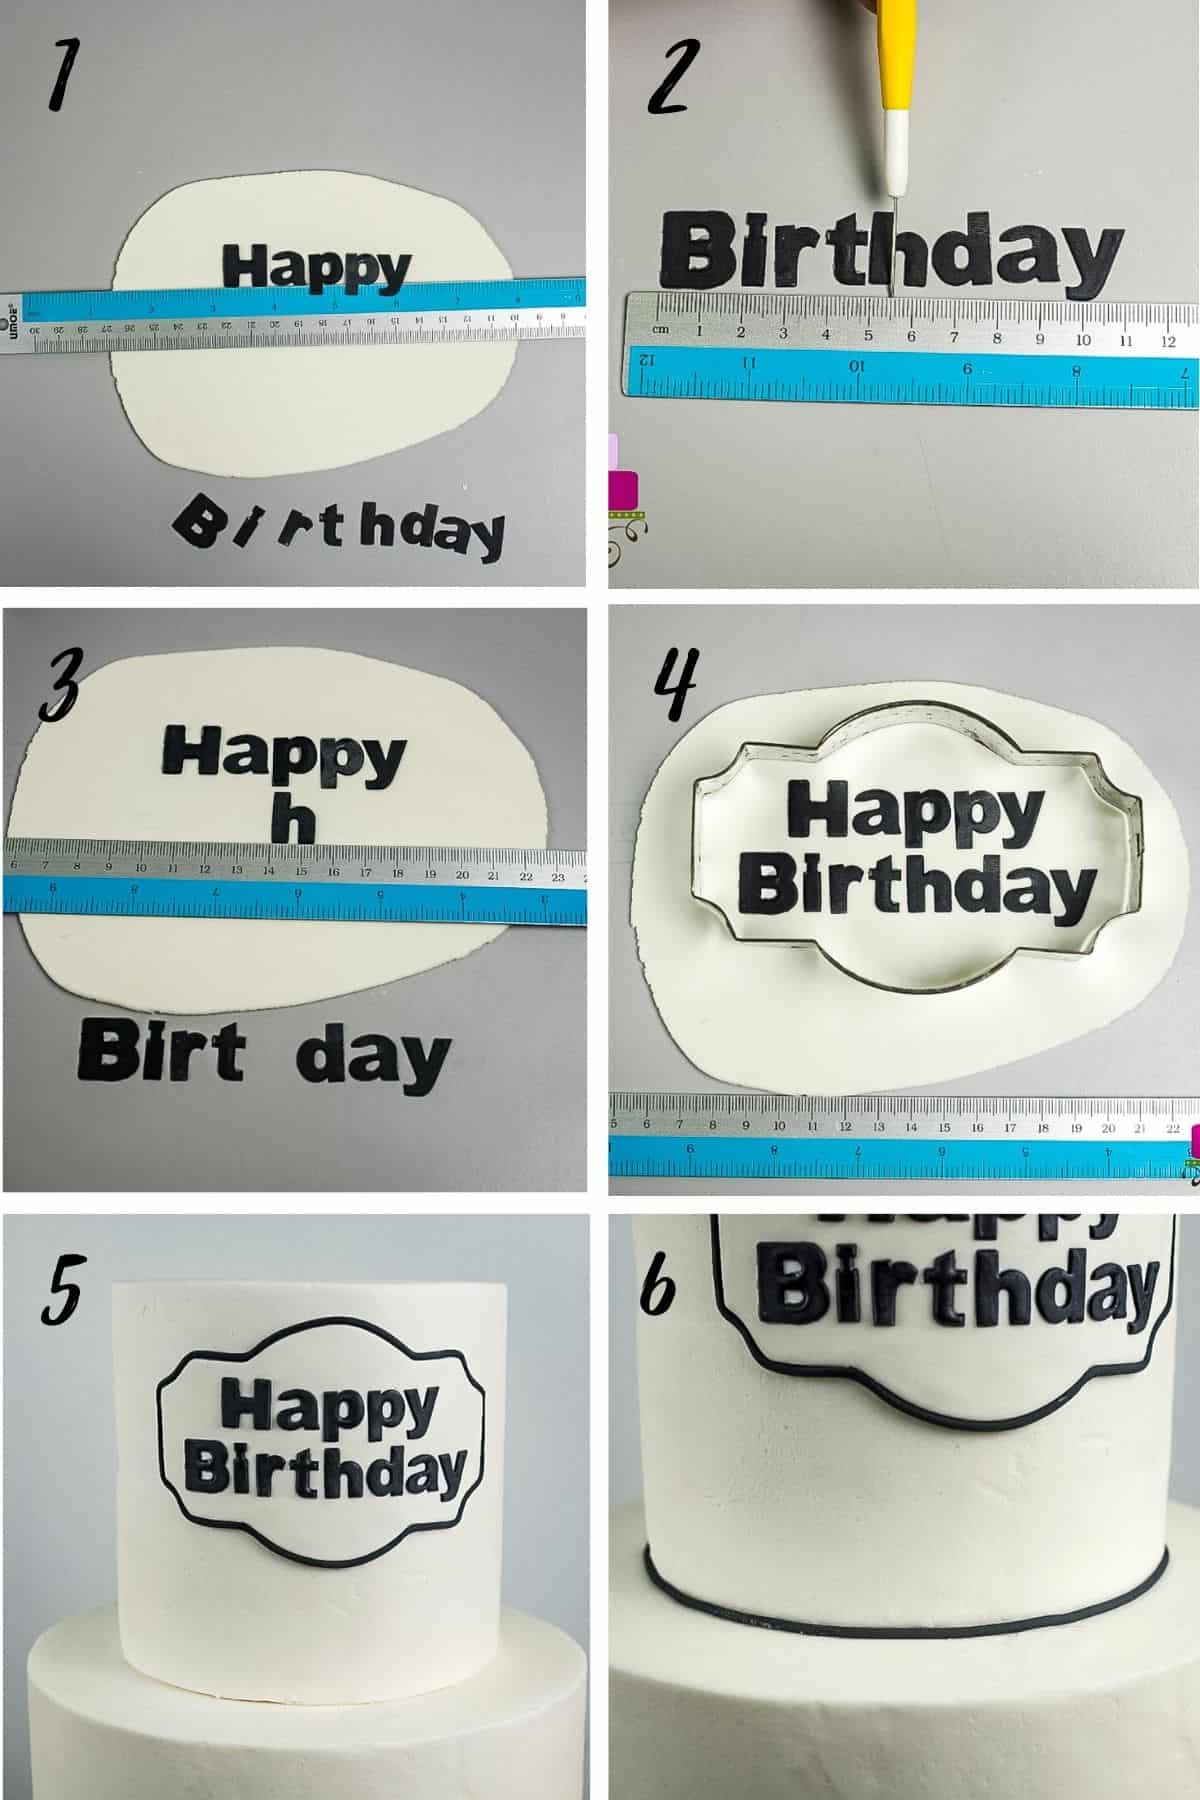 A poster of 6 images showing how to attached fondant letters to cake